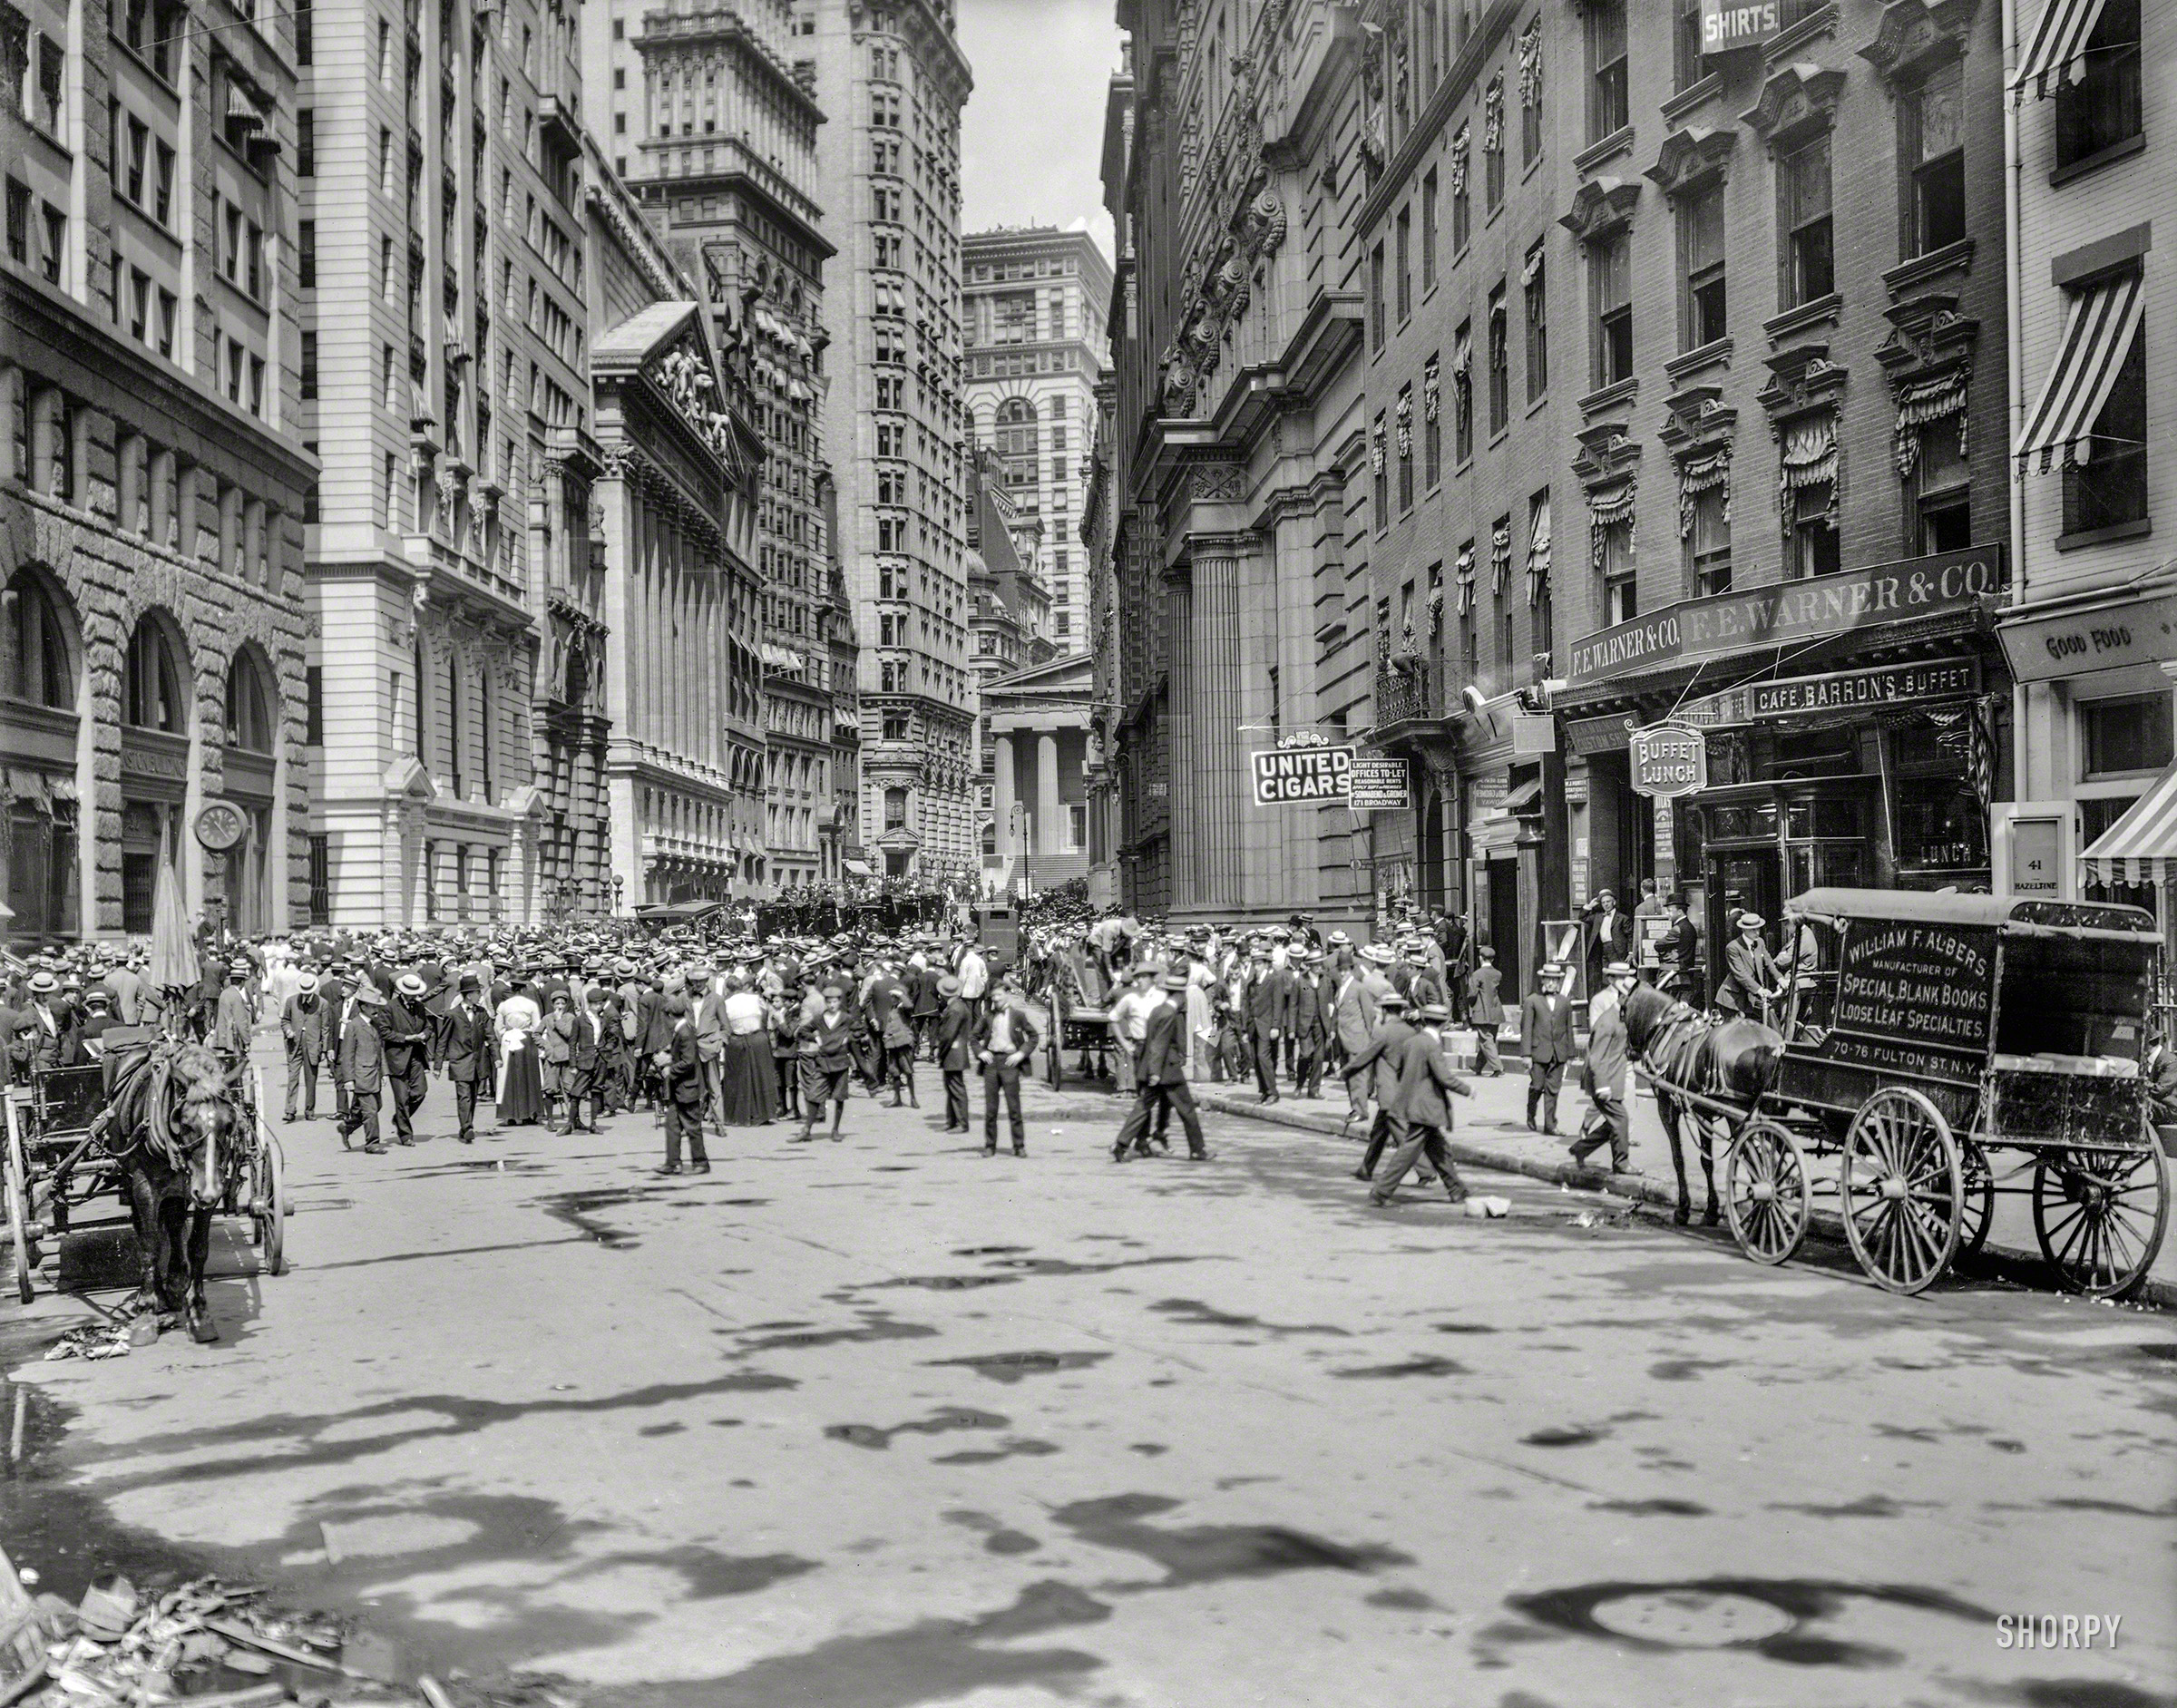 New York circa 1910. "The Curb Market, Broad Street." 8x10 inch dry plate glass negative, Detroit Publishing Company. View full size.